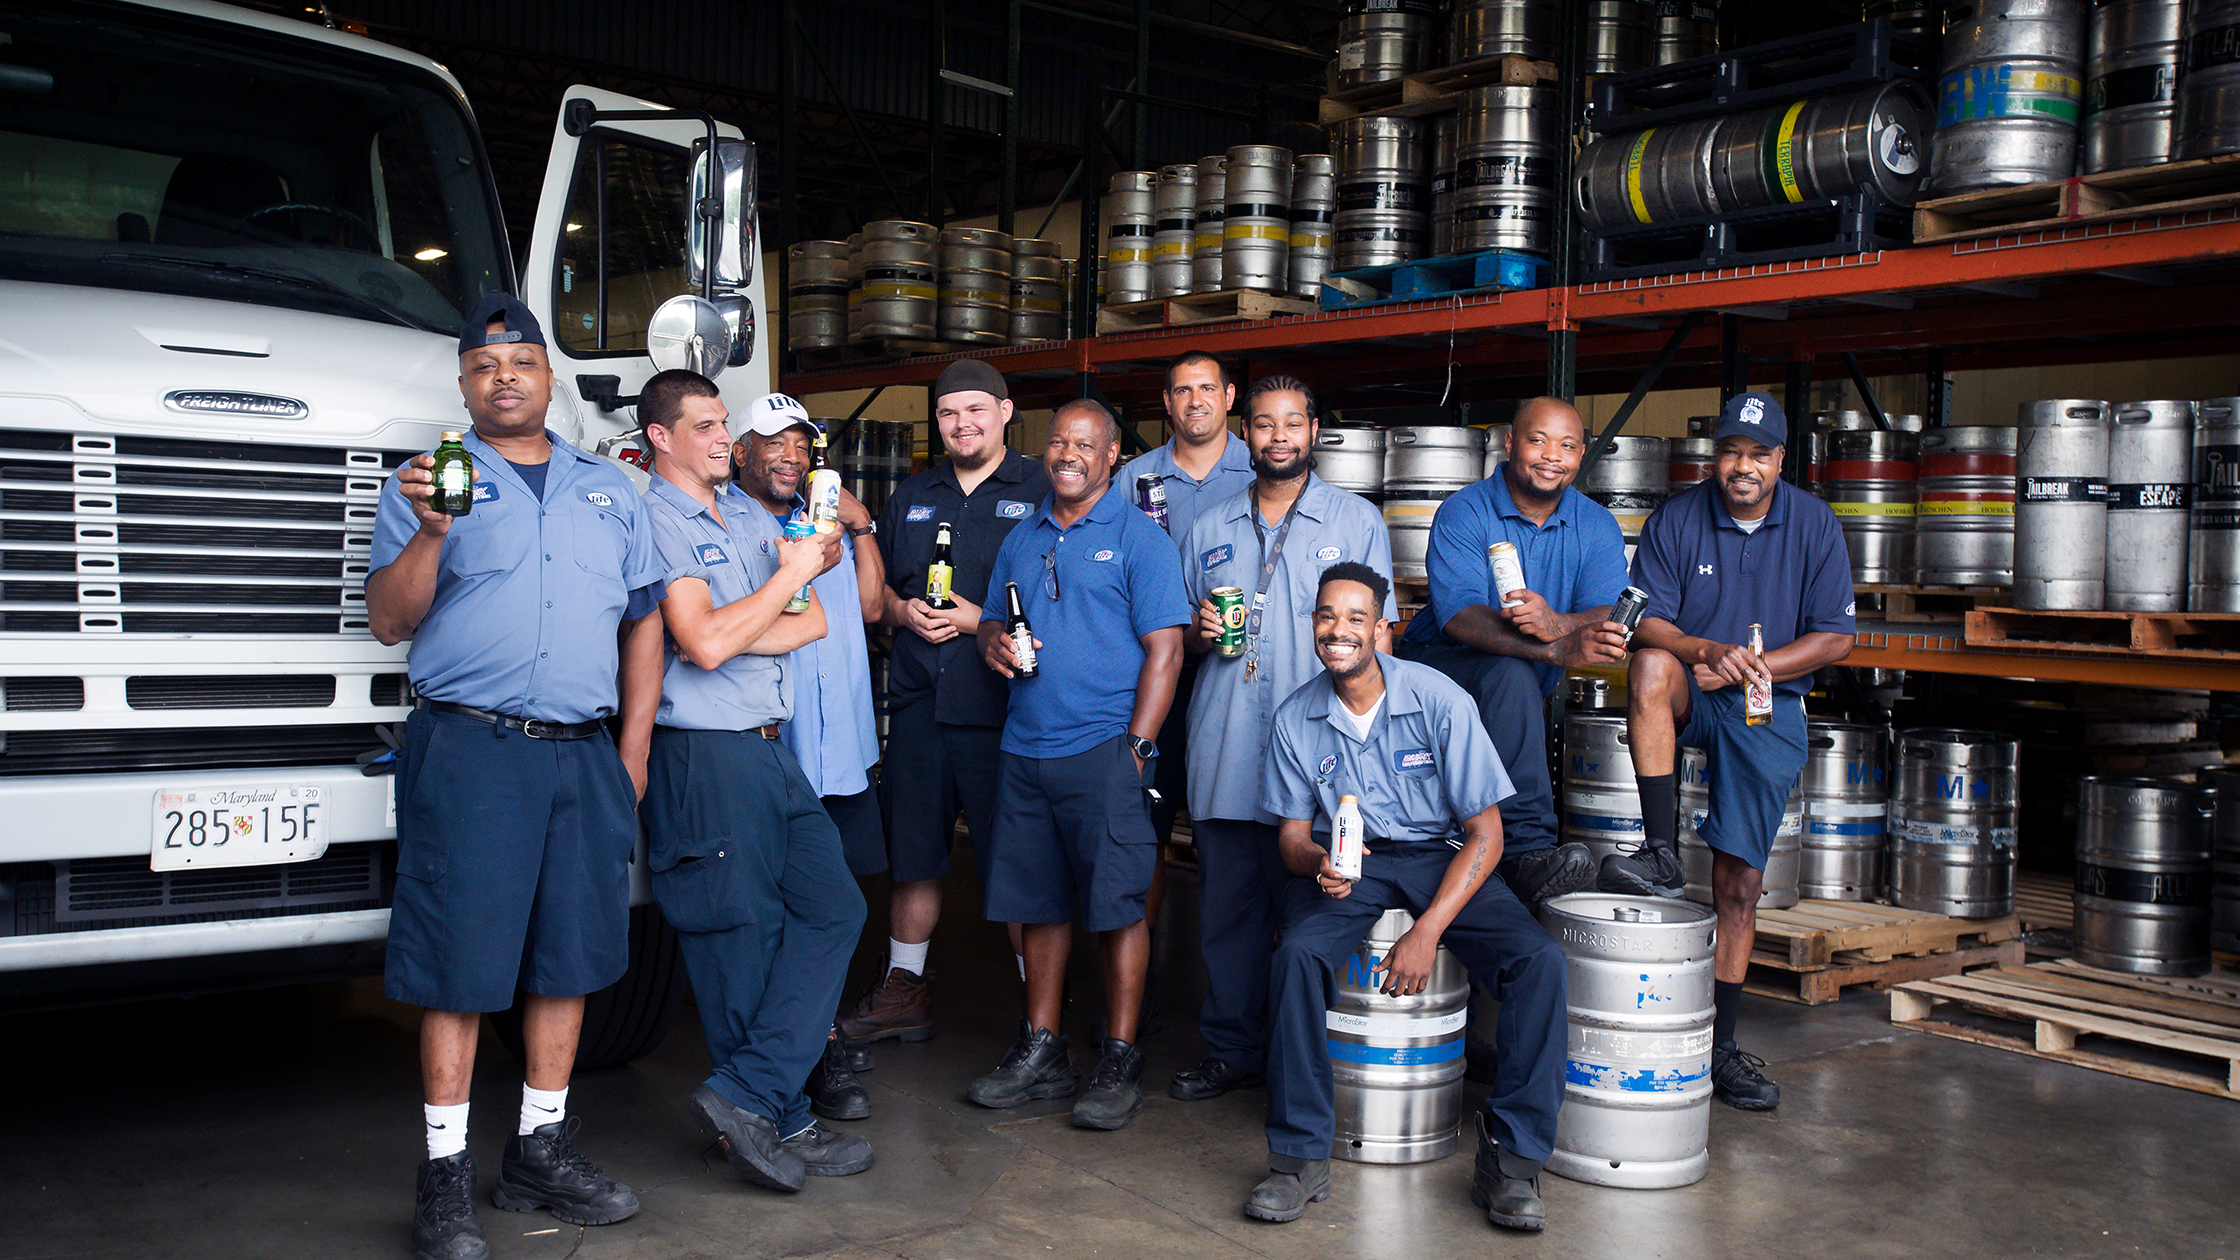 A group of eleven men in blue work uniforms pose with drinks in front of a delivery truck and stacked metal kegs in a warehouse. They appear relaxed and are smiling, some leaning on kegs or the truck.